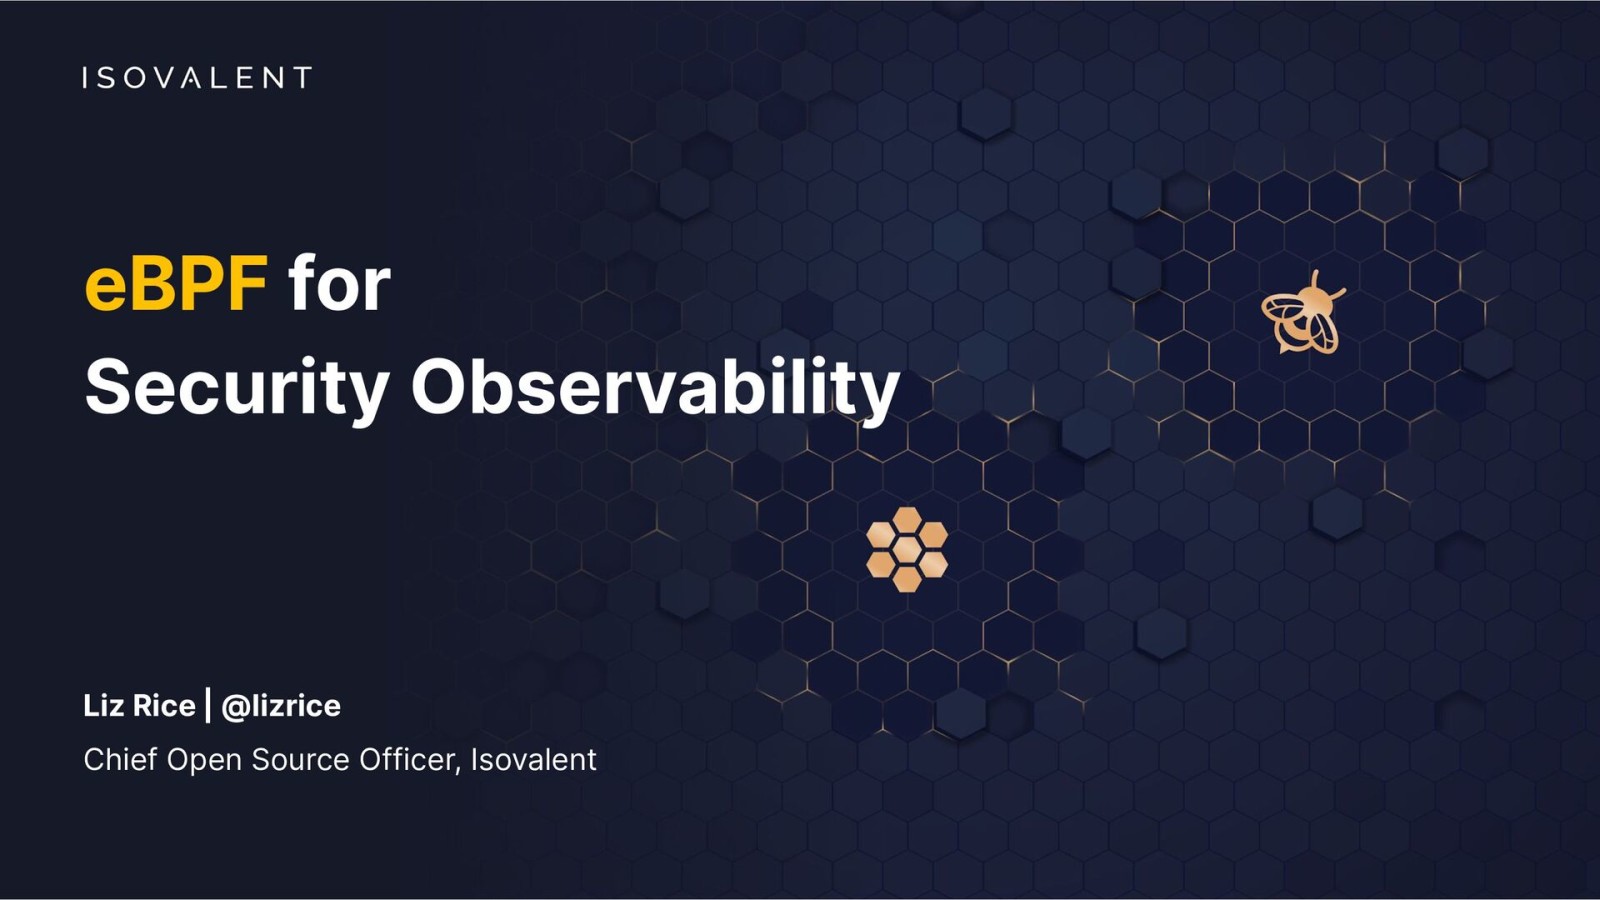 eBPF for security observability